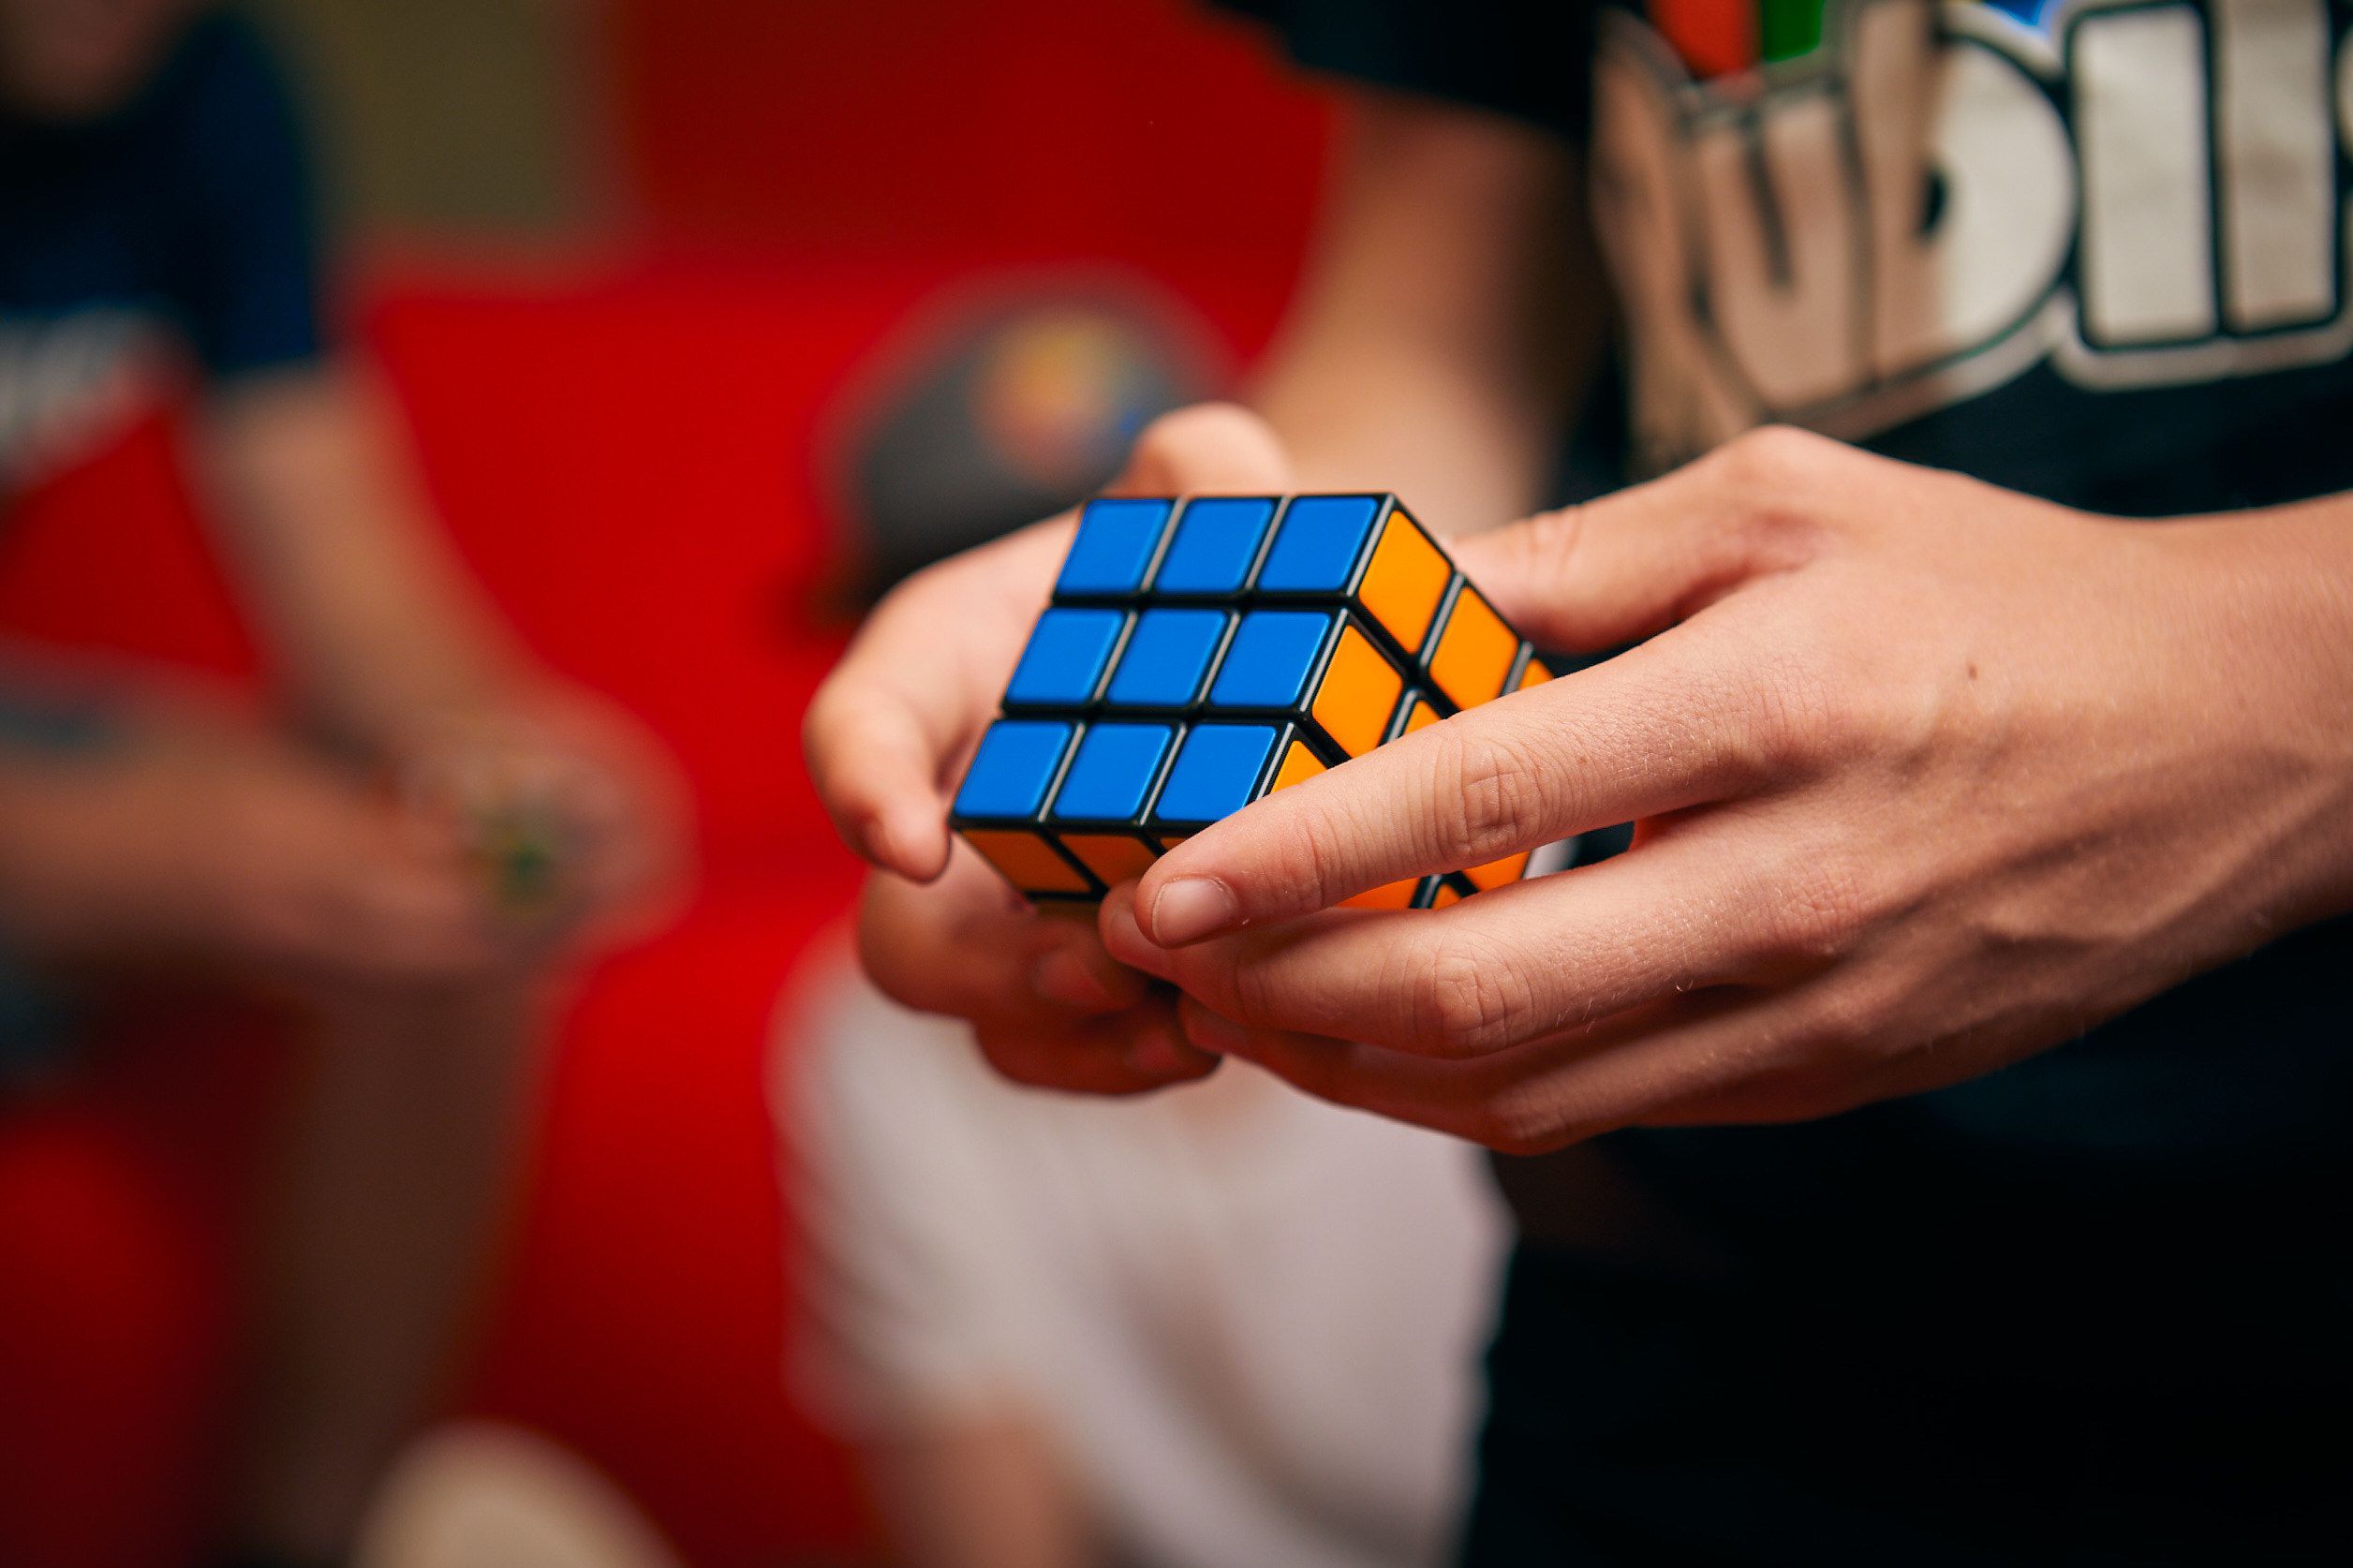 What Rubik's Cube Is Used in Competition - Joj cuber